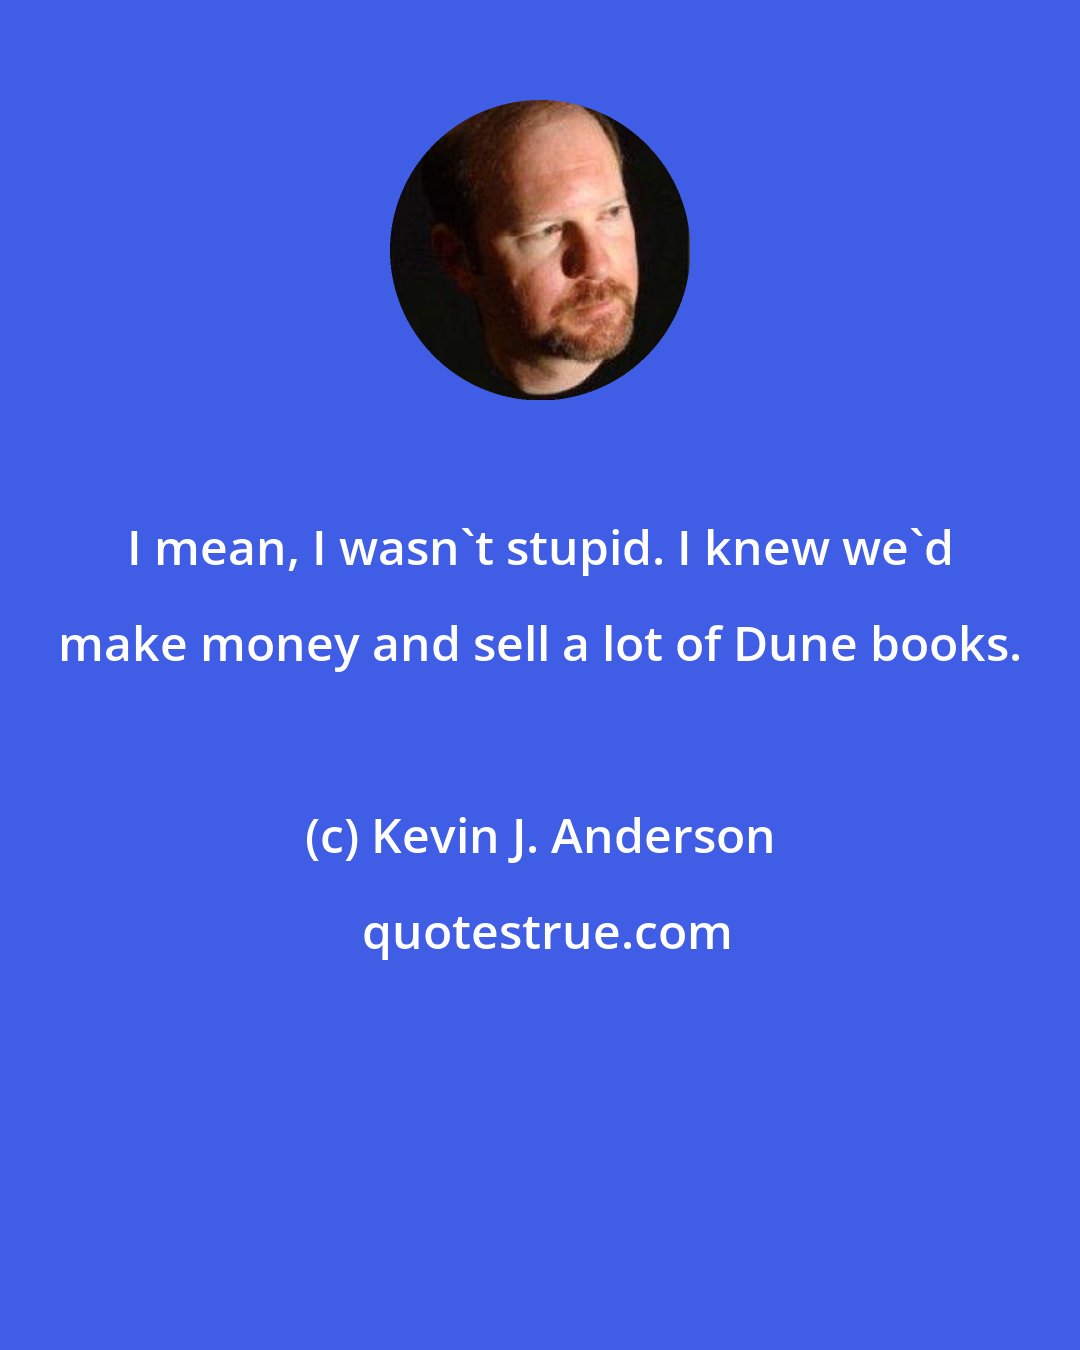 Kevin J. Anderson: I mean, I wasn't stupid. I knew we'd make money and sell a lot of Dune books.